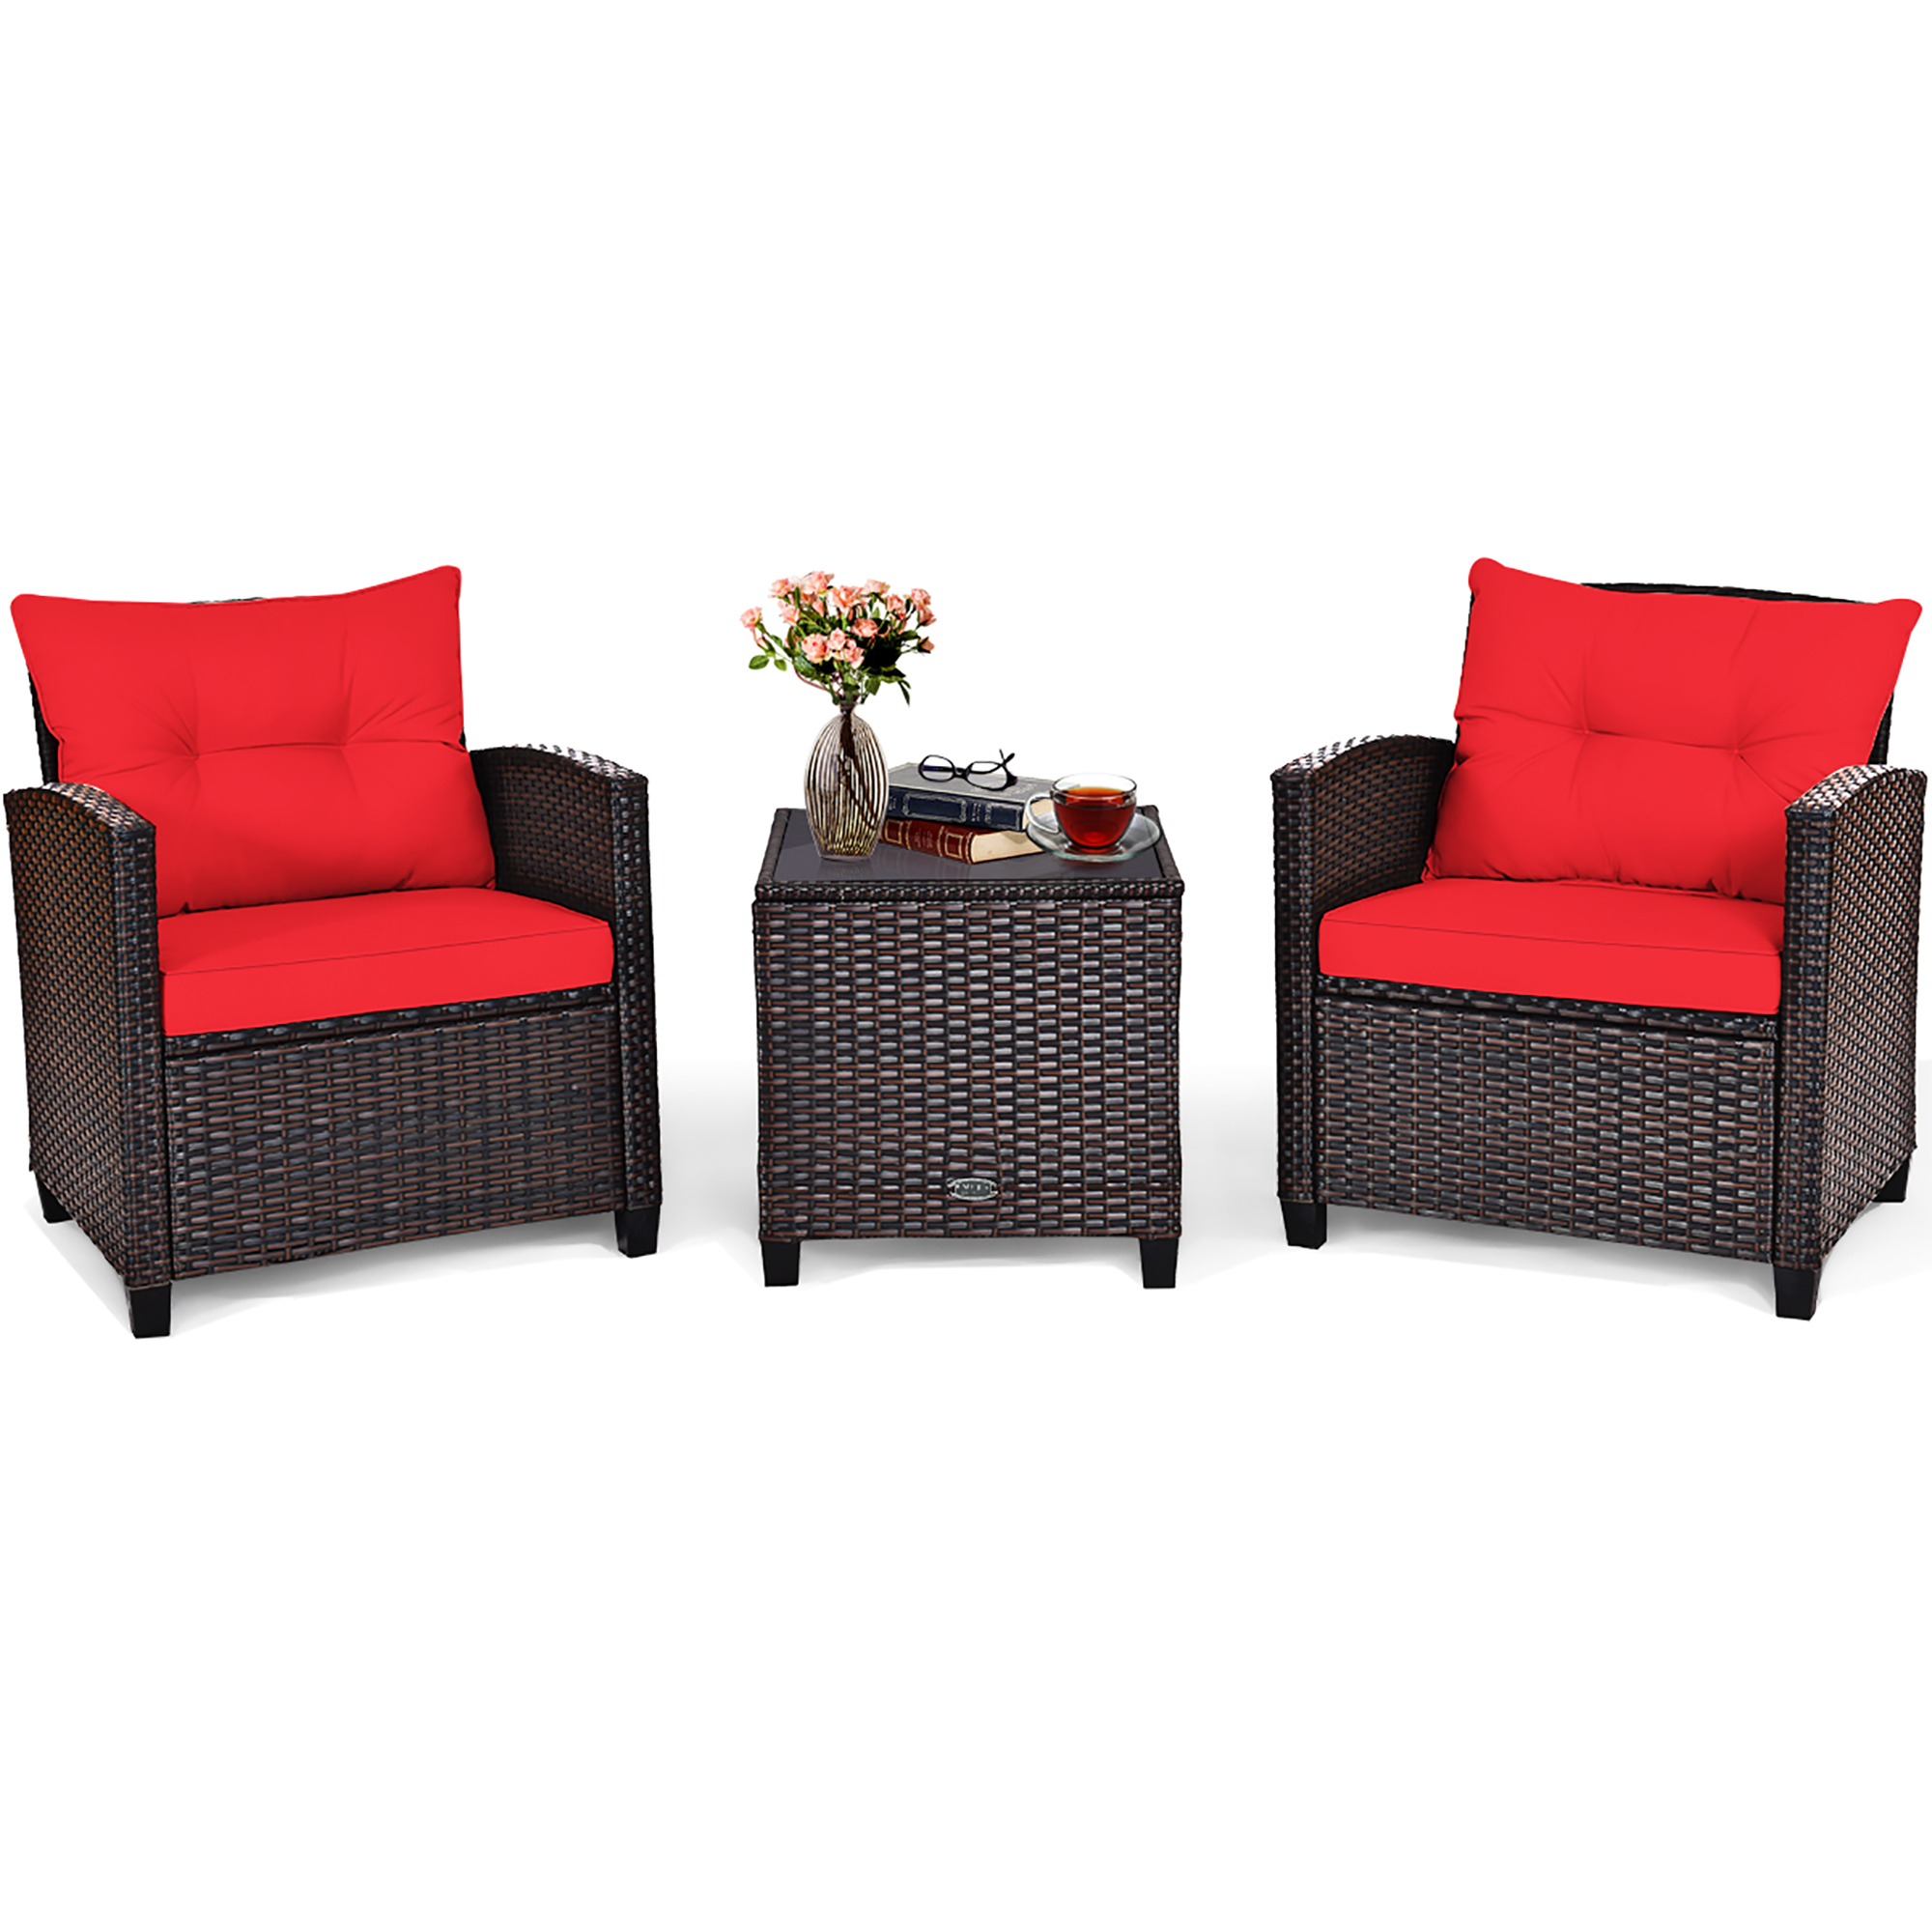 Costway 3PCS Patio Rattan Furniture Set Cushioned Conversation Set Sofa Coffee Table Red - image 2 of 10